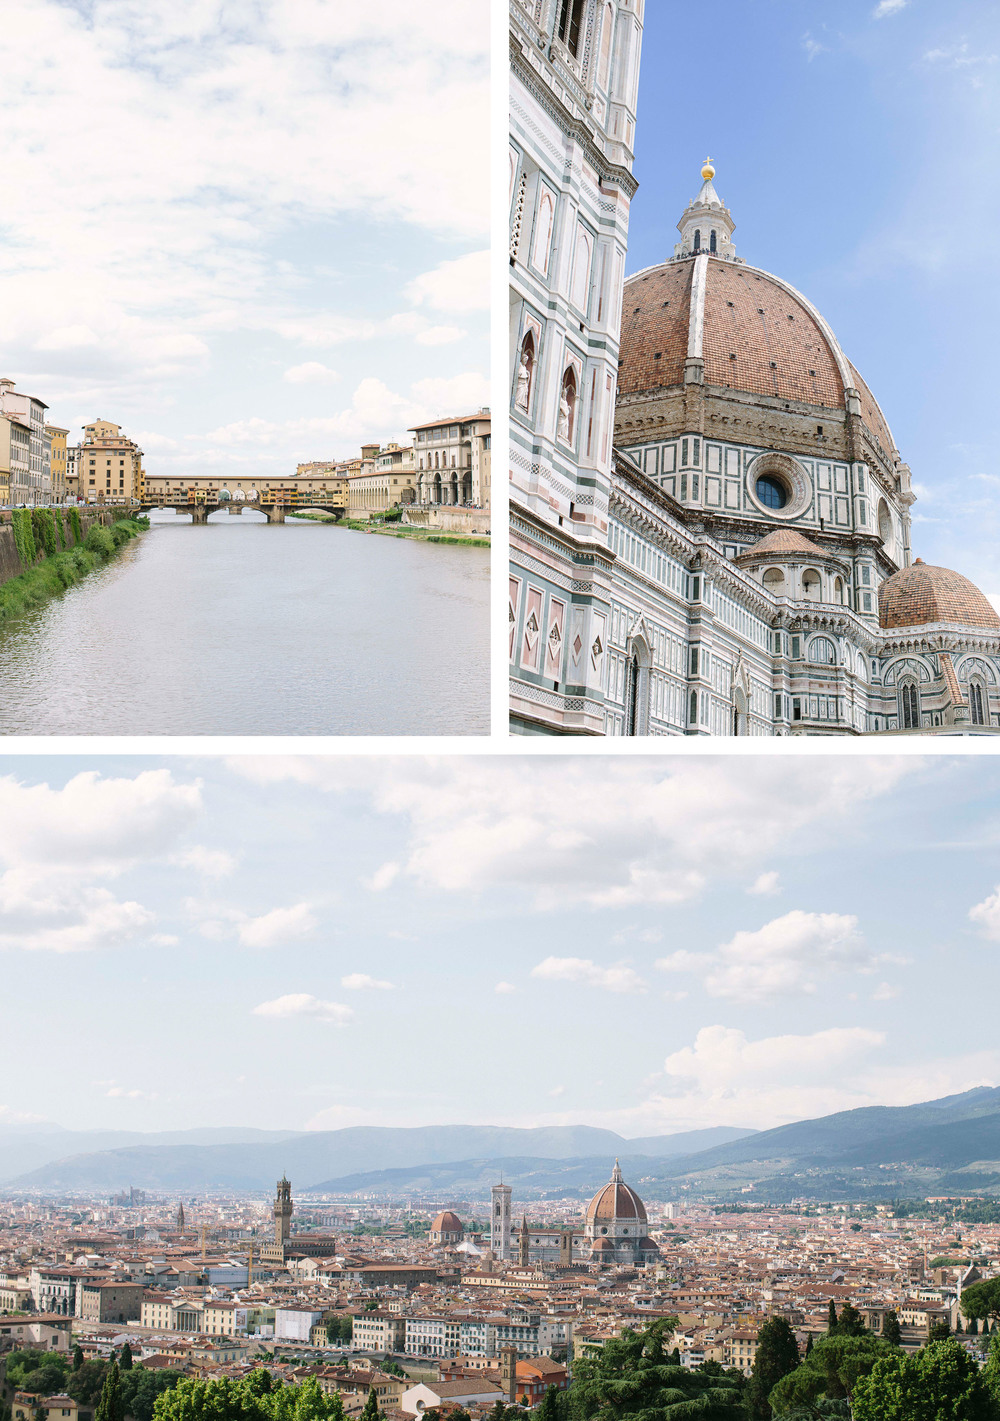 I've always heard incredible things about Florence, but it truly was the perfect mix of city and small town.